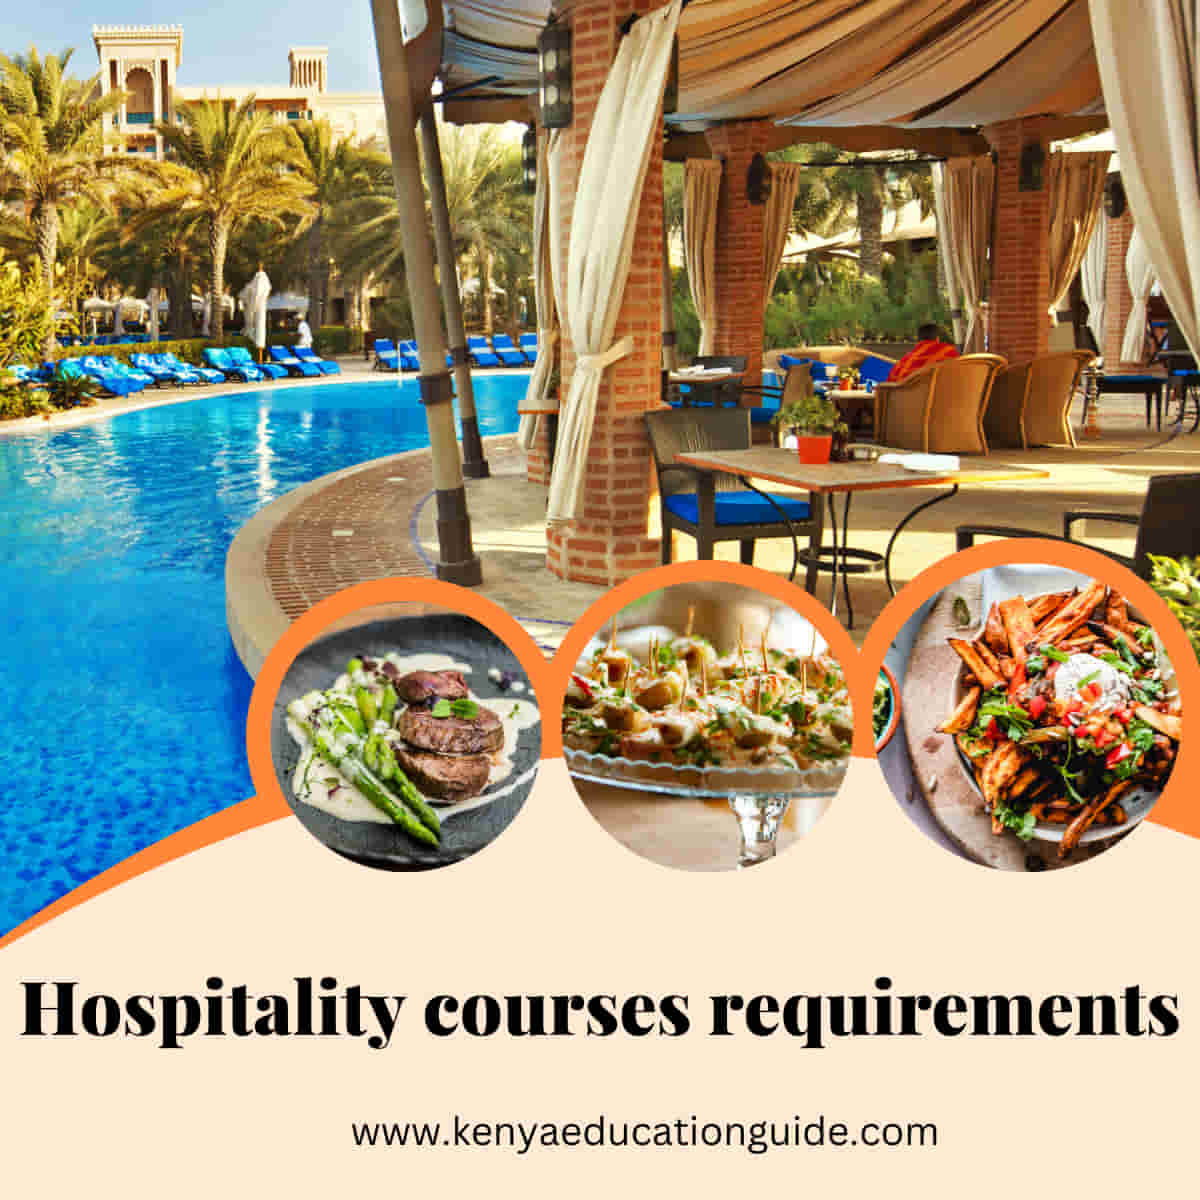 Hospitality courses requirements